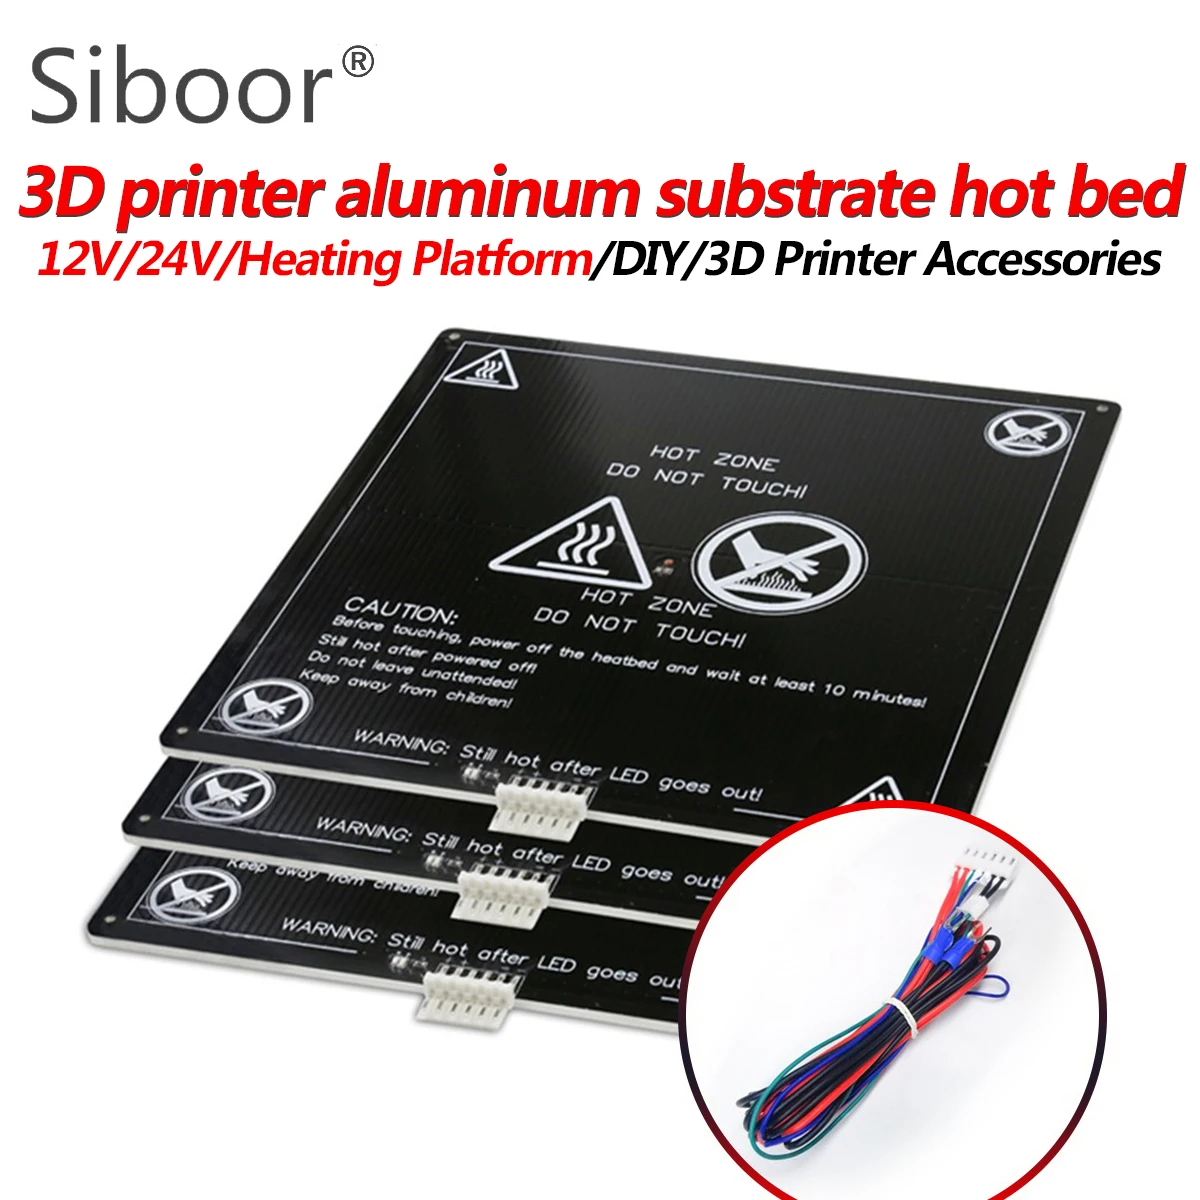 12V 24V Heated Bed Aluminum Heatbed Platform Kit for Anet A8 A6 Hotbed Plate MK3 Hotbed with Wire Cable 3D Printer Parts DIY Kit